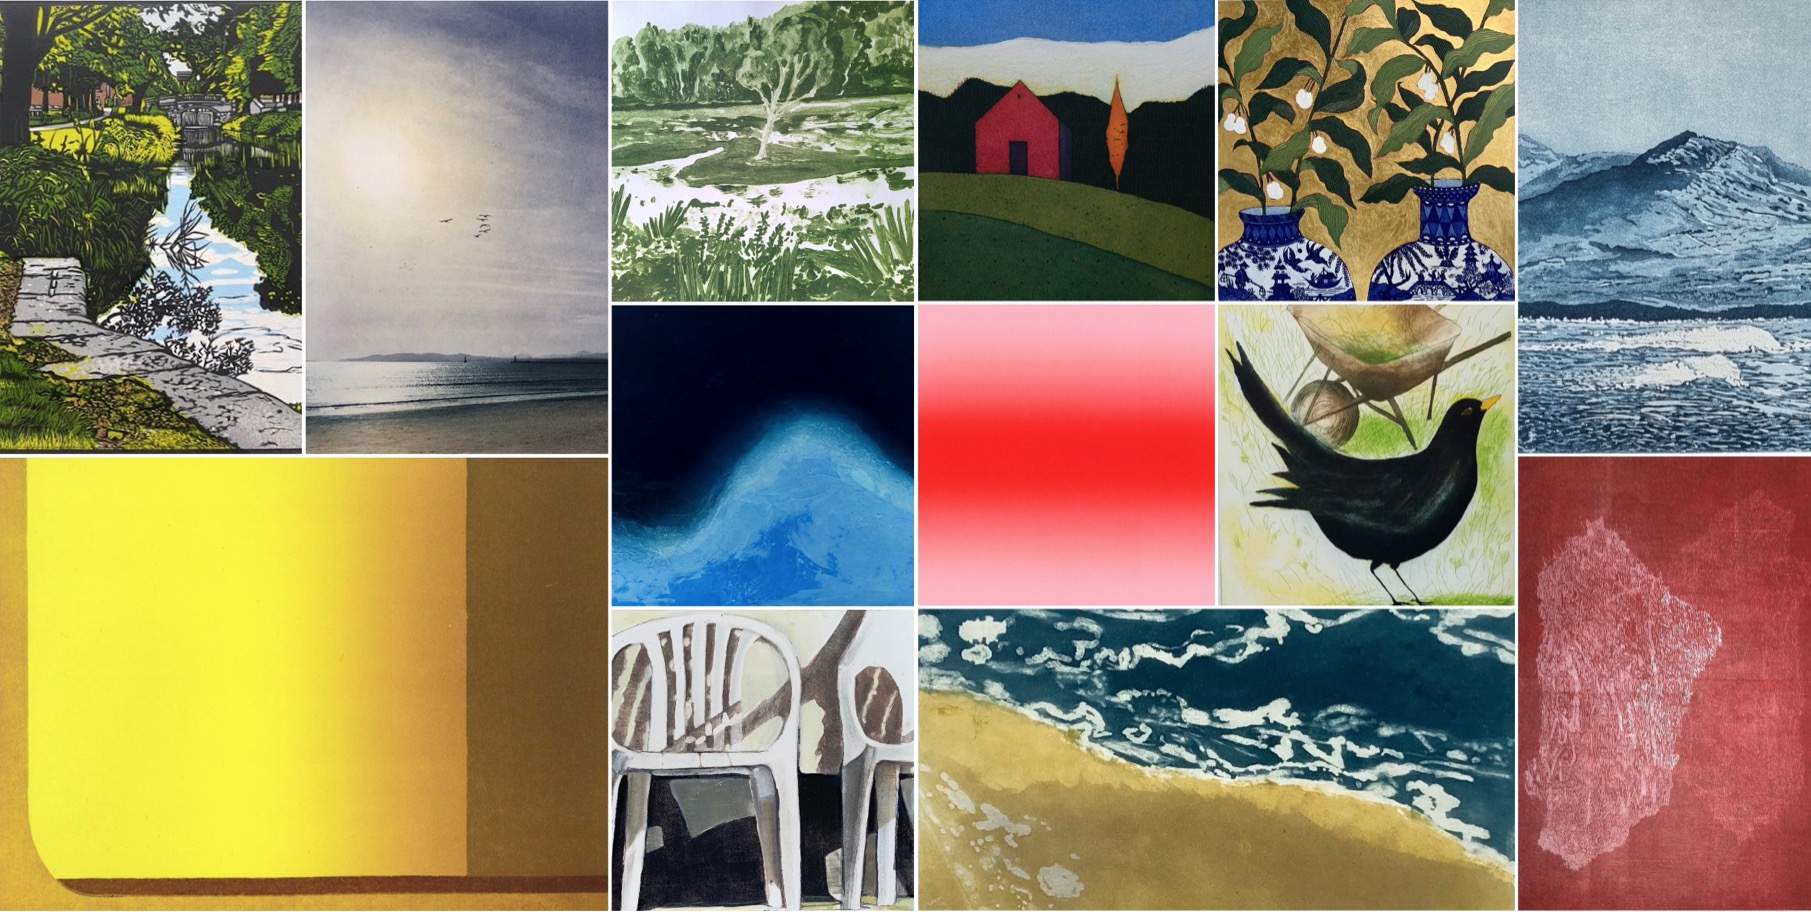 Summer Exhibition 2023 | Saturday 22 July – Saturday 26 August 2023 | Graphic Studio Gallery | Image: cropped glimpses of 13 artworks, including a blackbird, flowers in vases, seascapes, a canalscape, a riverscape, chairs, a red building, and a bit of abstraction